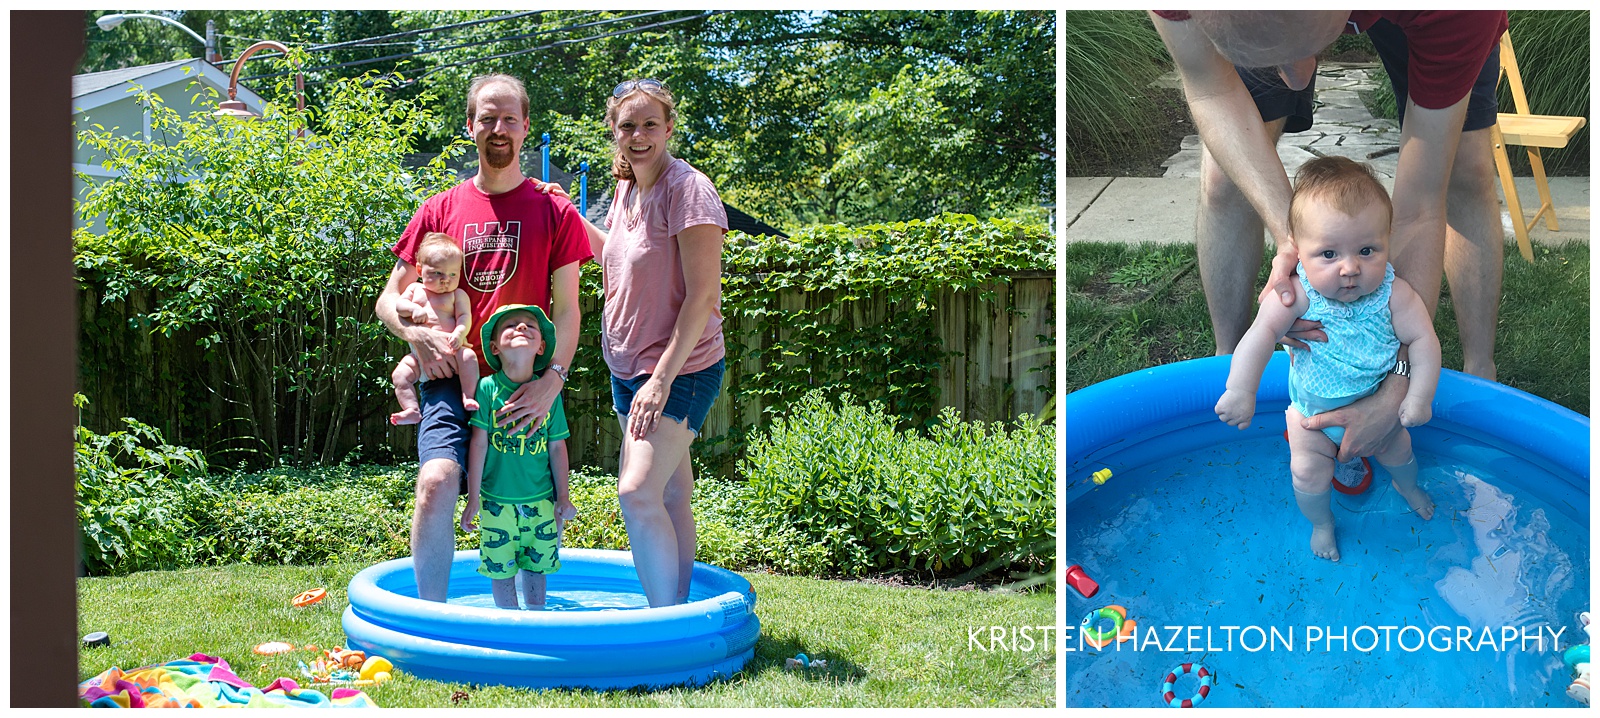 A family of four standing in a kiddie pool